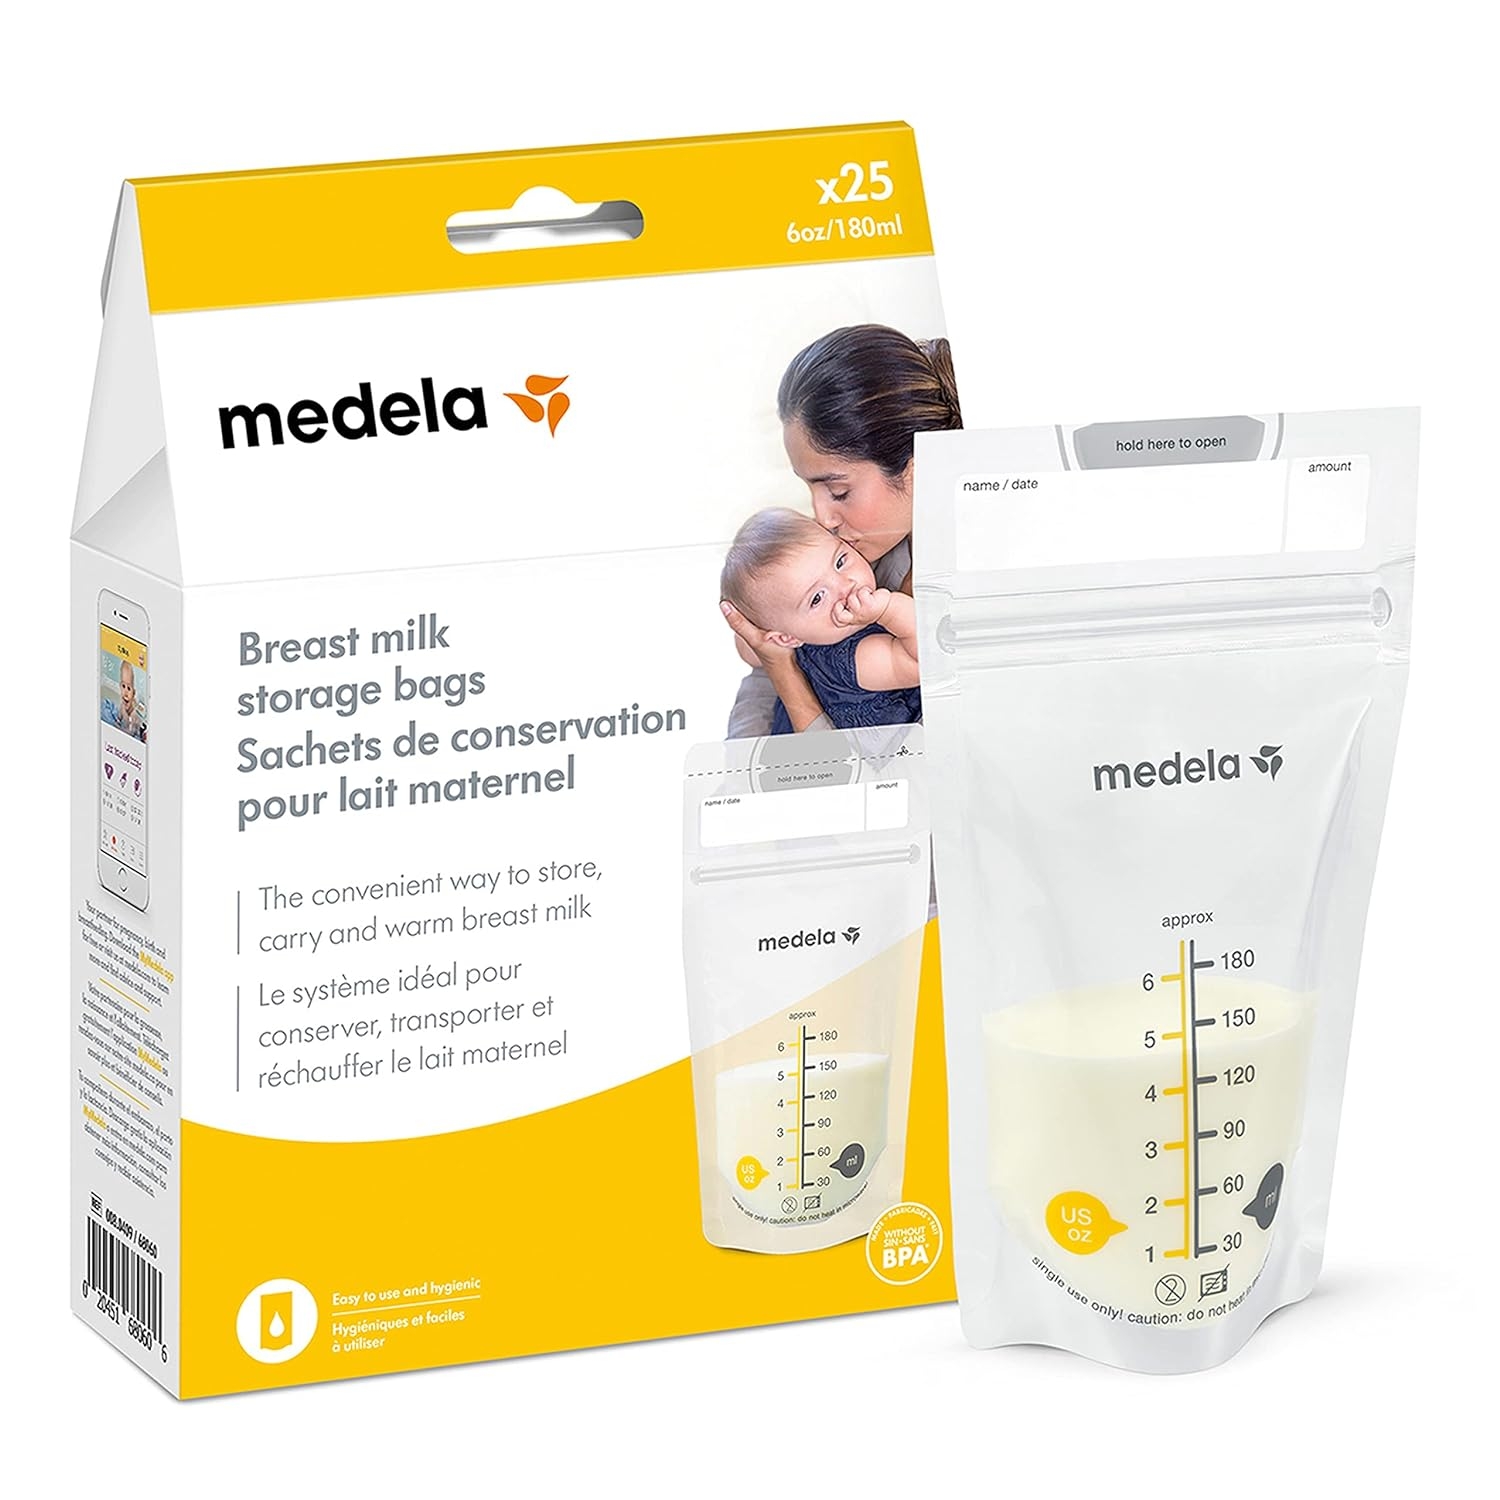 Medela Breastmilk Storage Bags, 25 Count, Ready to Use Breast Milk Storing Bags for Breastfeeding, Self Standing Bag, Space Saving Flat Profile, Hygienically Pre-Sealed, 6 Ounce, White